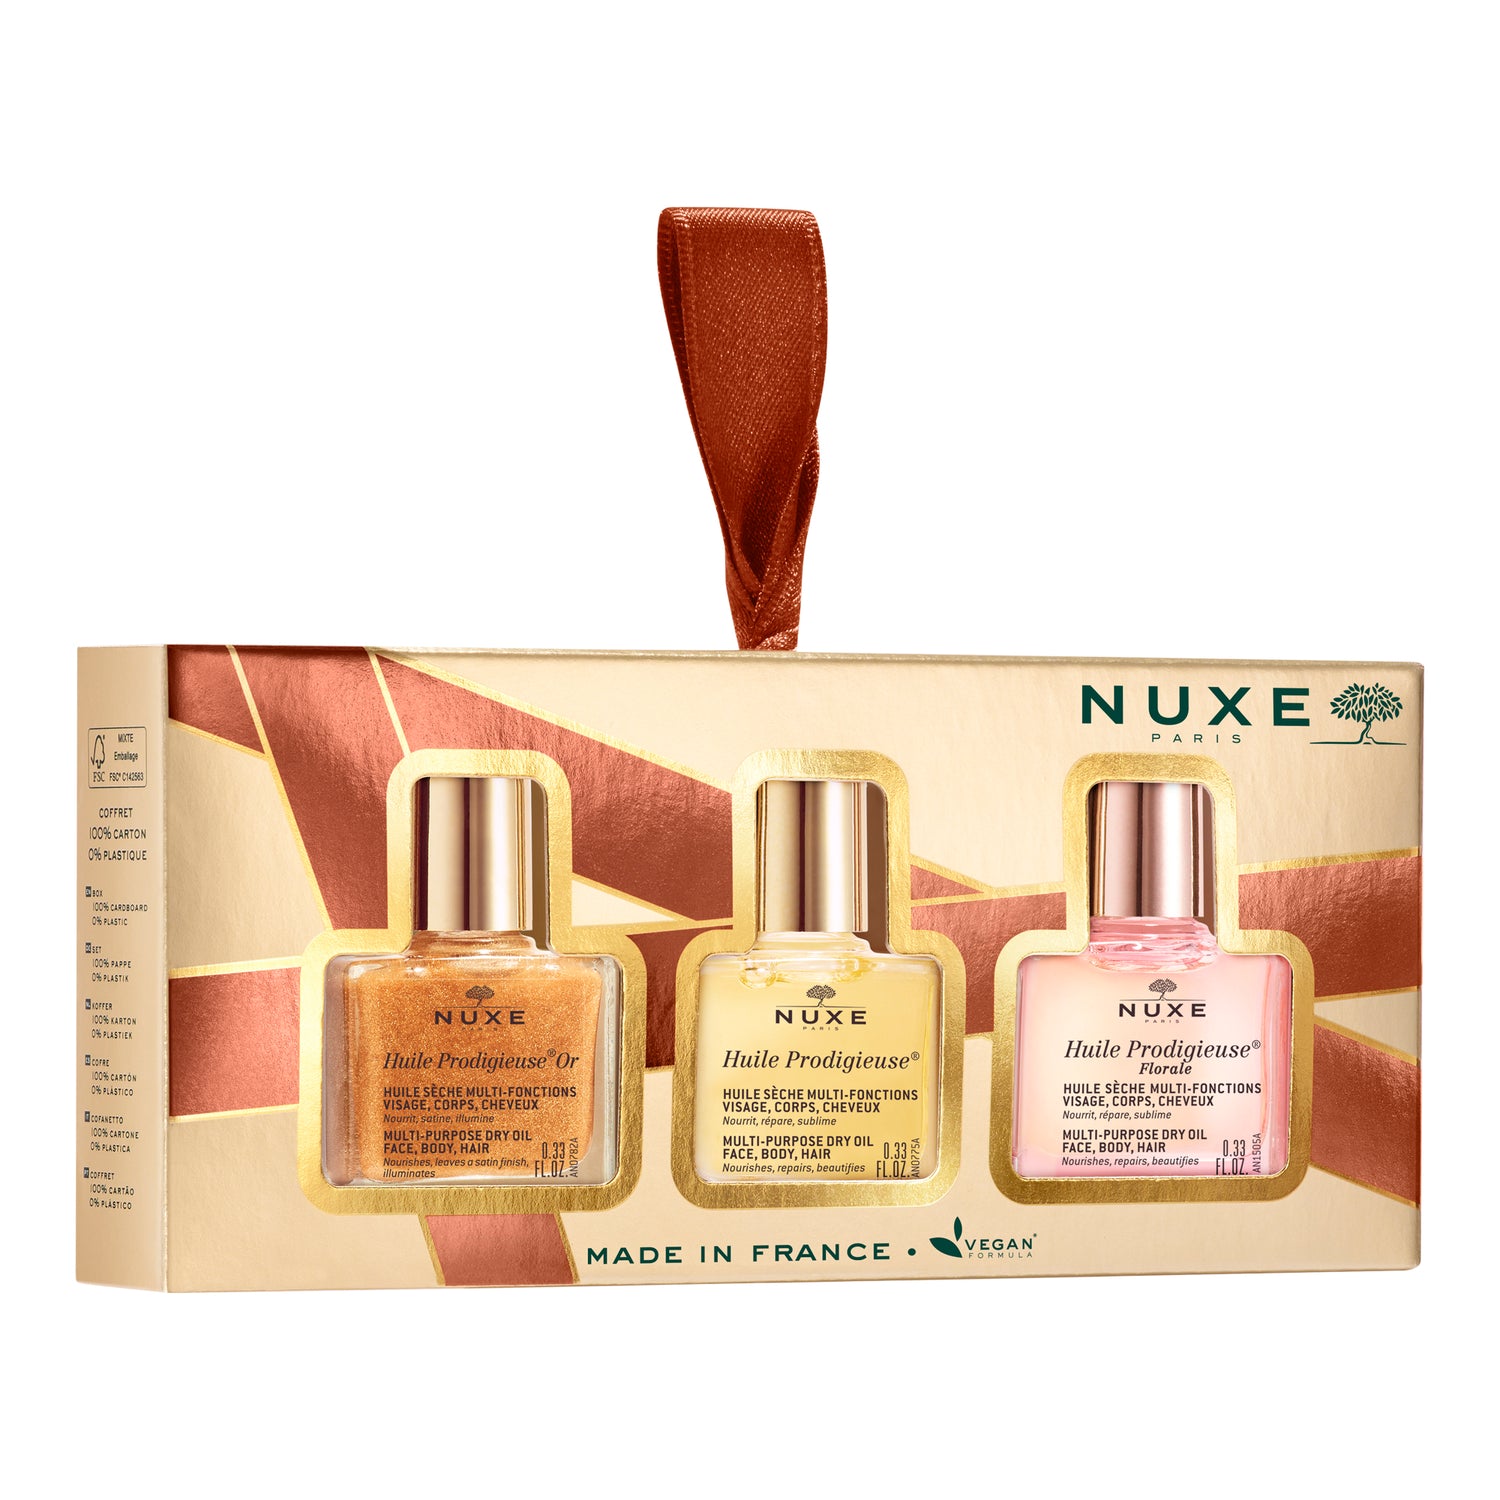 NUXE THE PRODIGIEUX 3 PIECE GIFT SET 